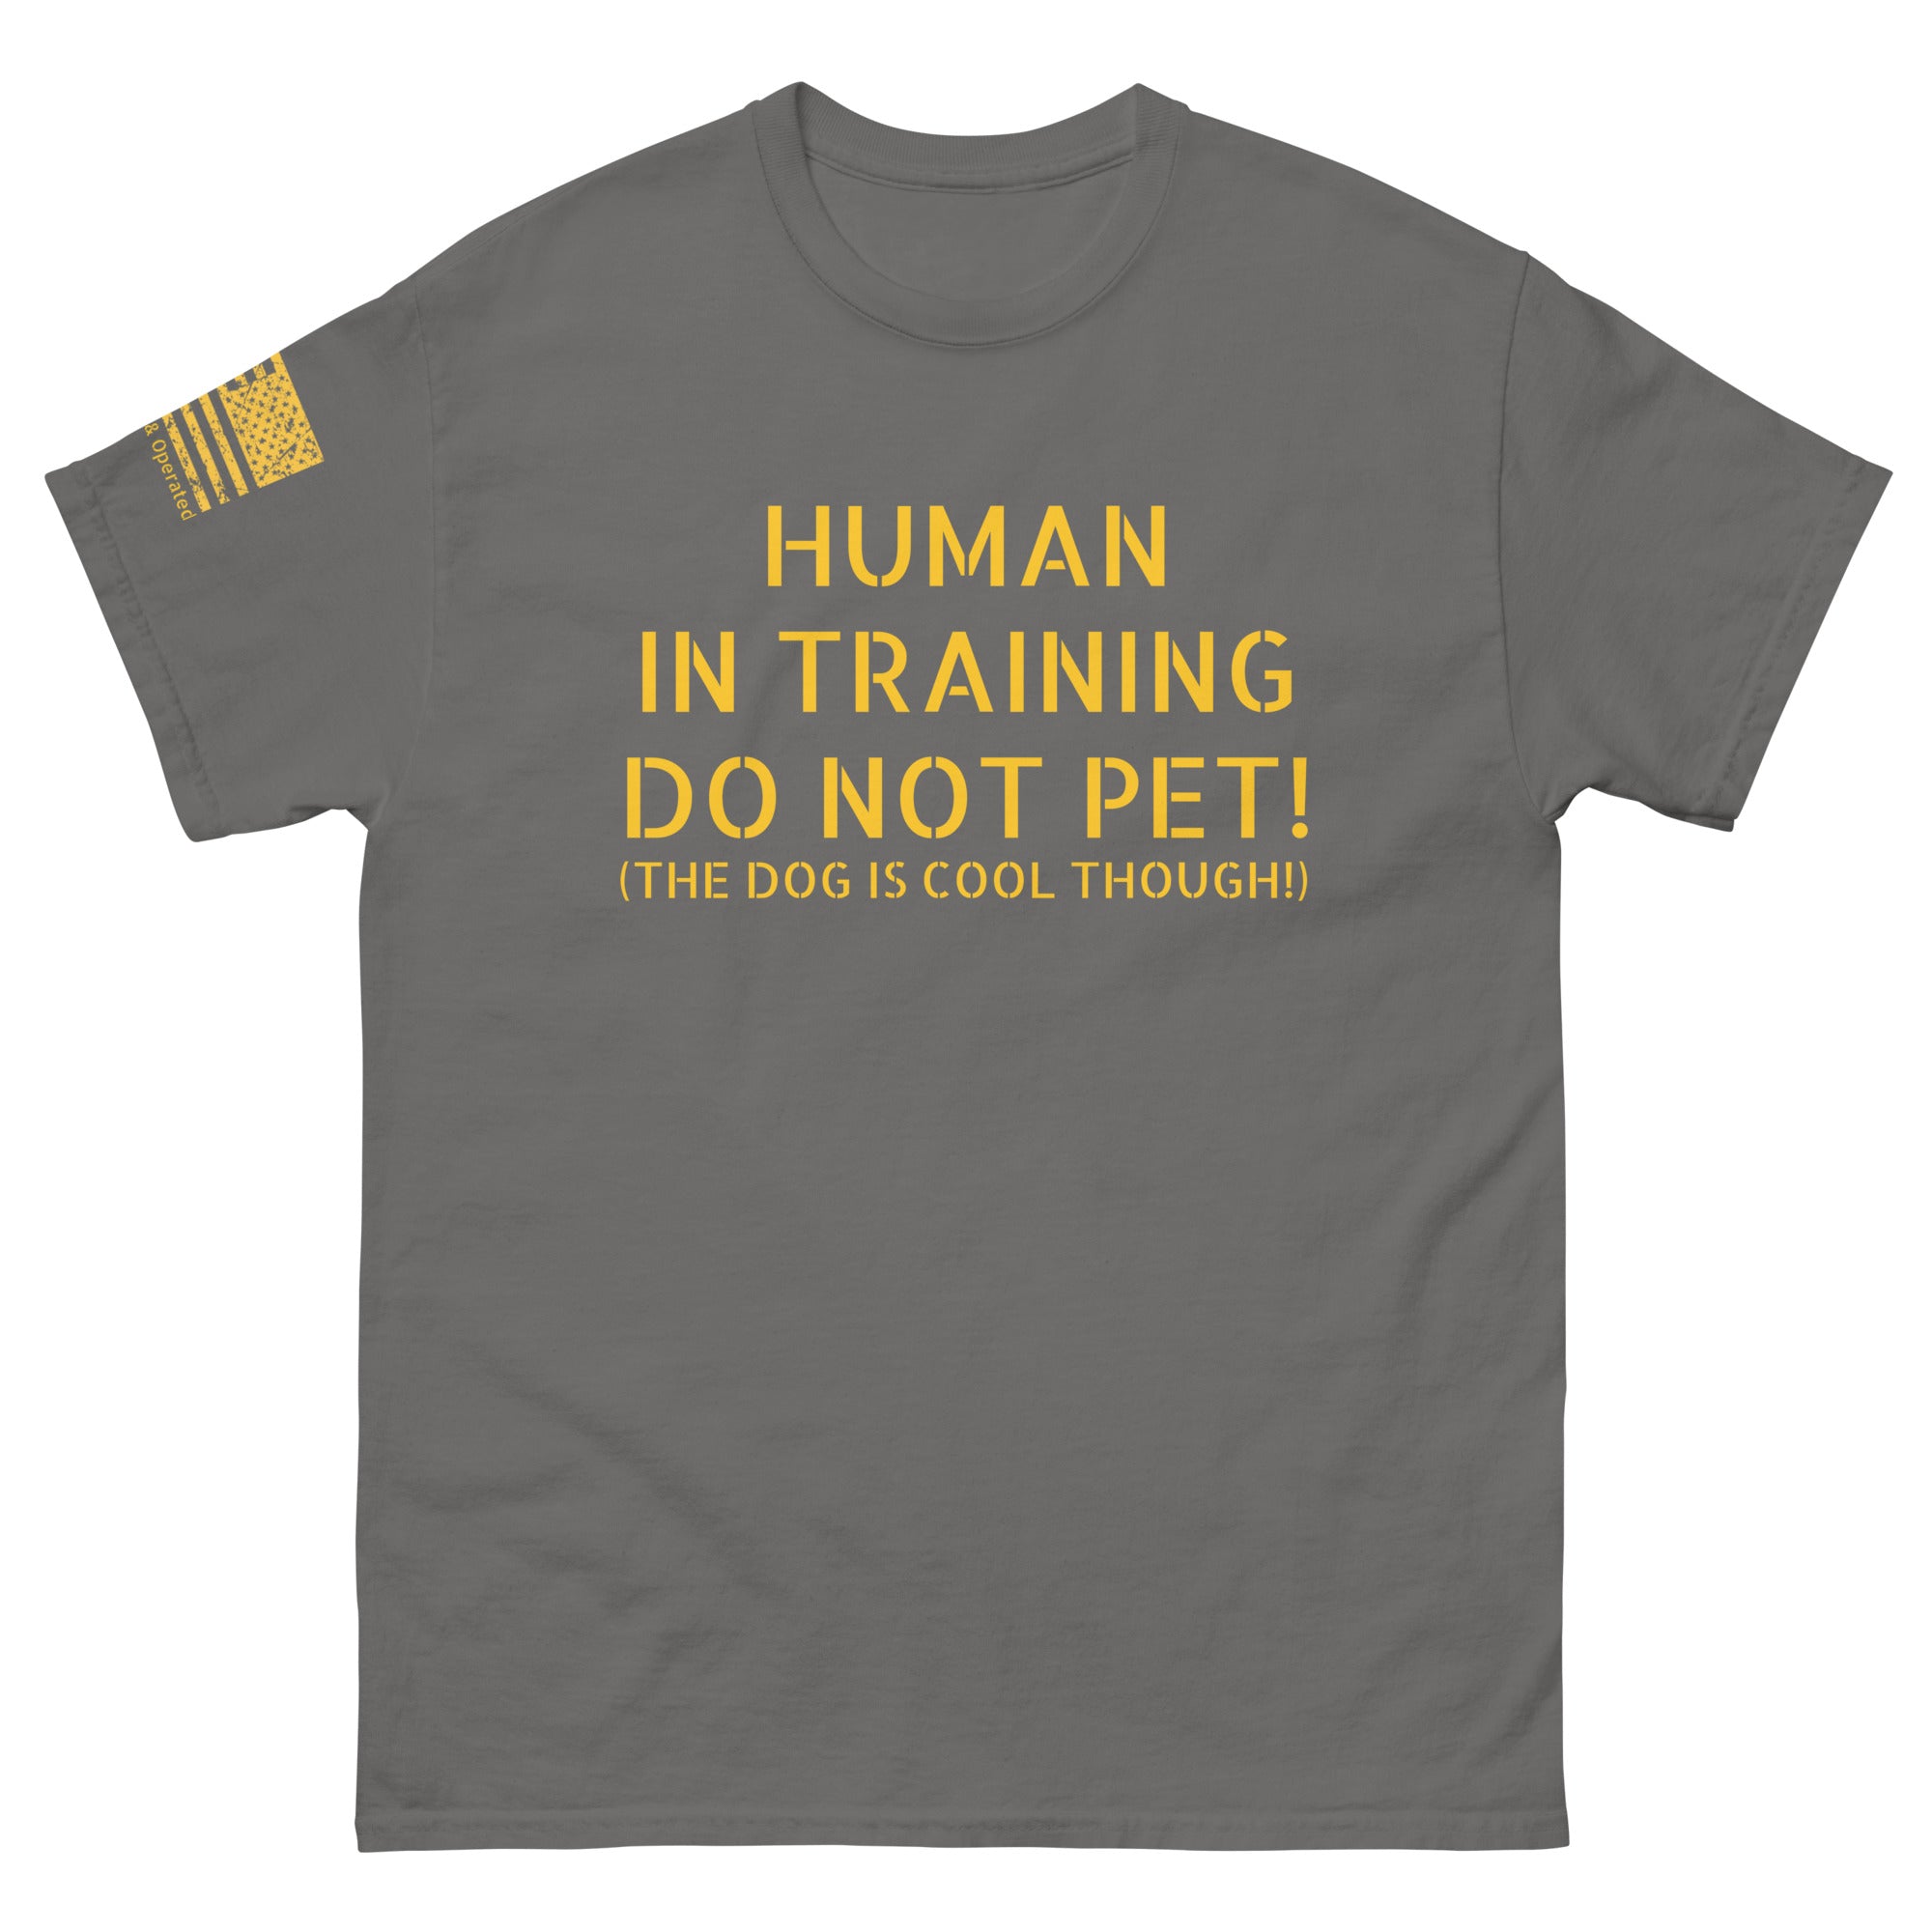 Men's T-Shirt ELS Human in Training Do not Pet! (But the Dog is Cool Though)